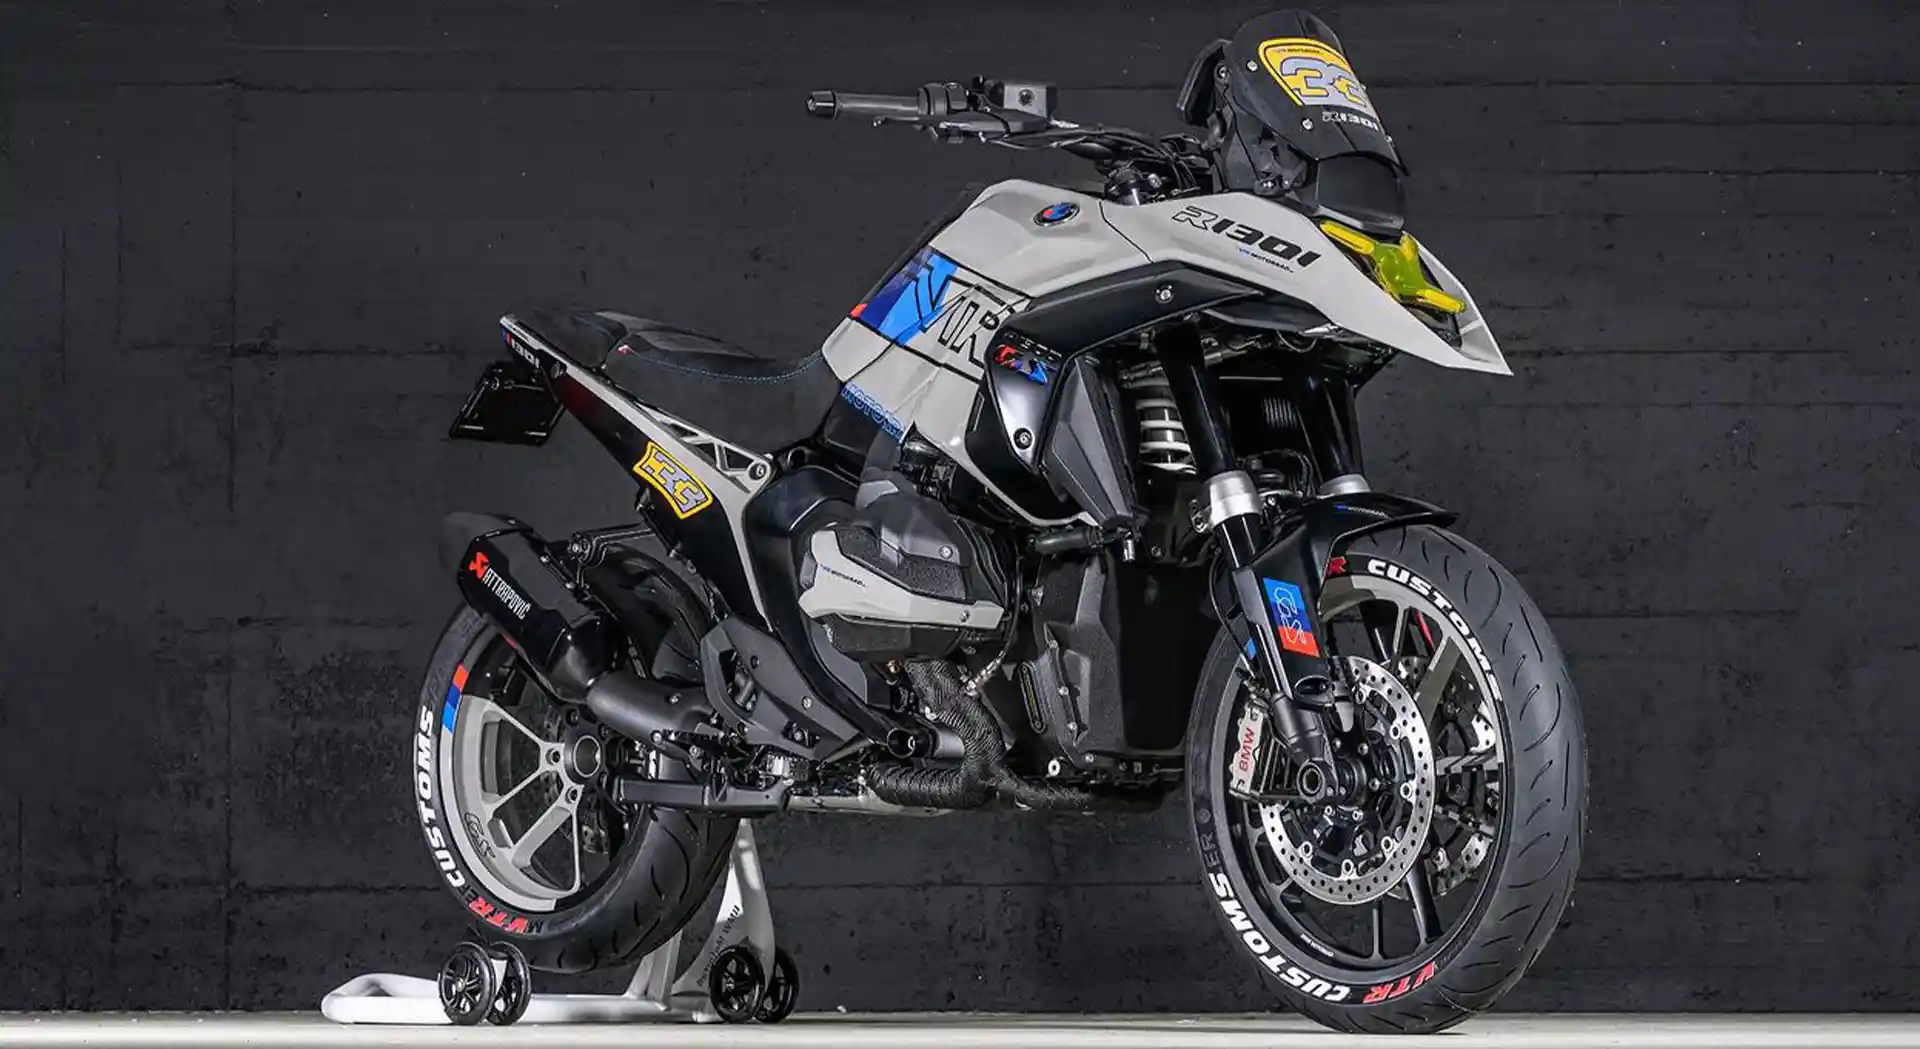 BMW R 1300 GS Adventure Motorcycle Transformed Into a Supermoto for The Circuit